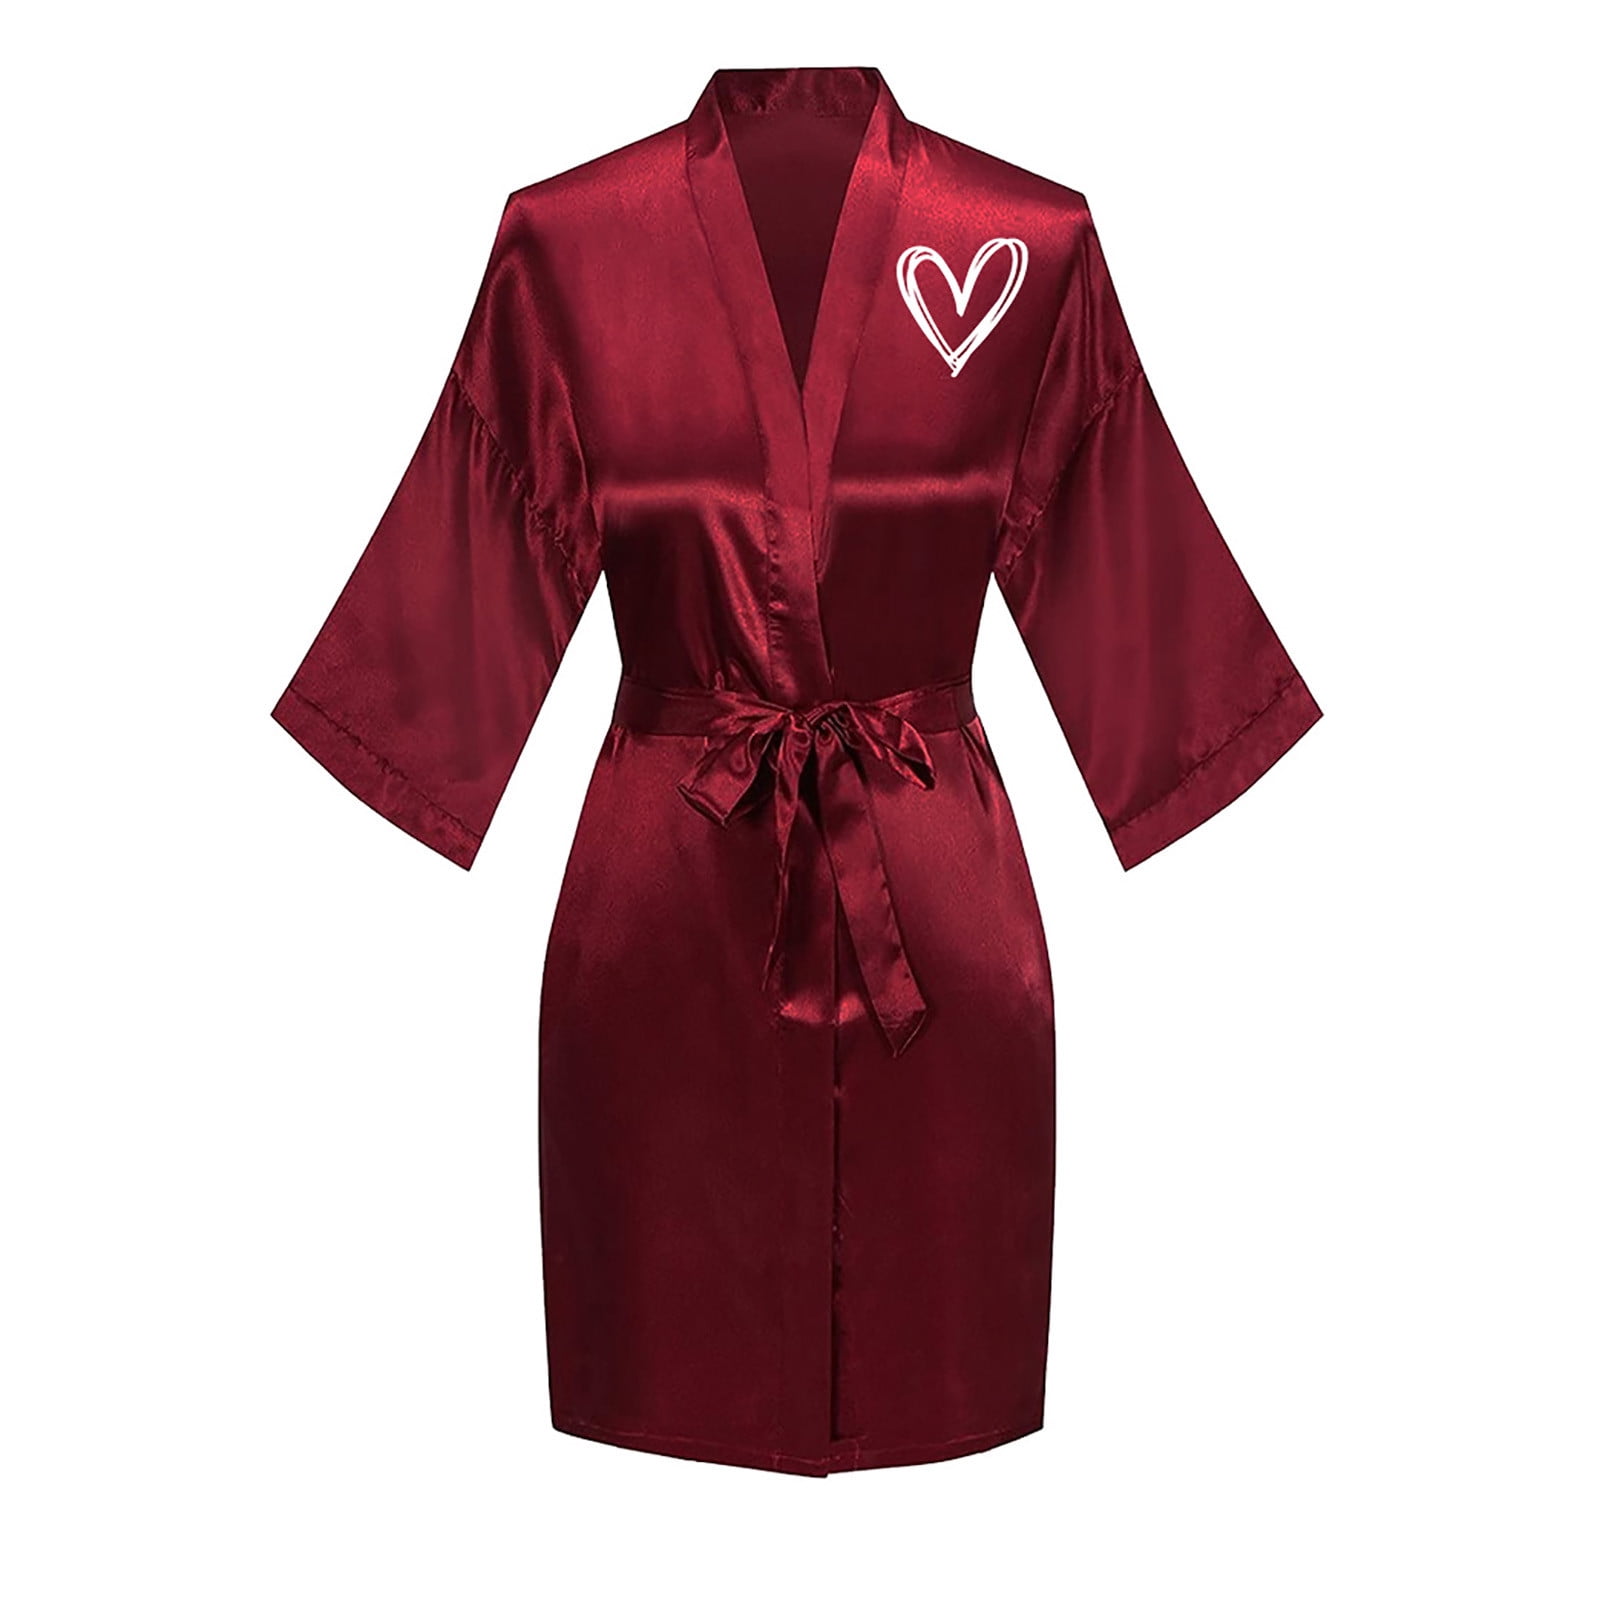 Virmaxy Valentine's Day Silk Robe for Women Love Graphic Long Satin Bride  Bridesmaid Wedding Party Robes Lightweight Soft Sleepwear Full Length  Bathrobe Sexy Home Clothing with Belt Red M 